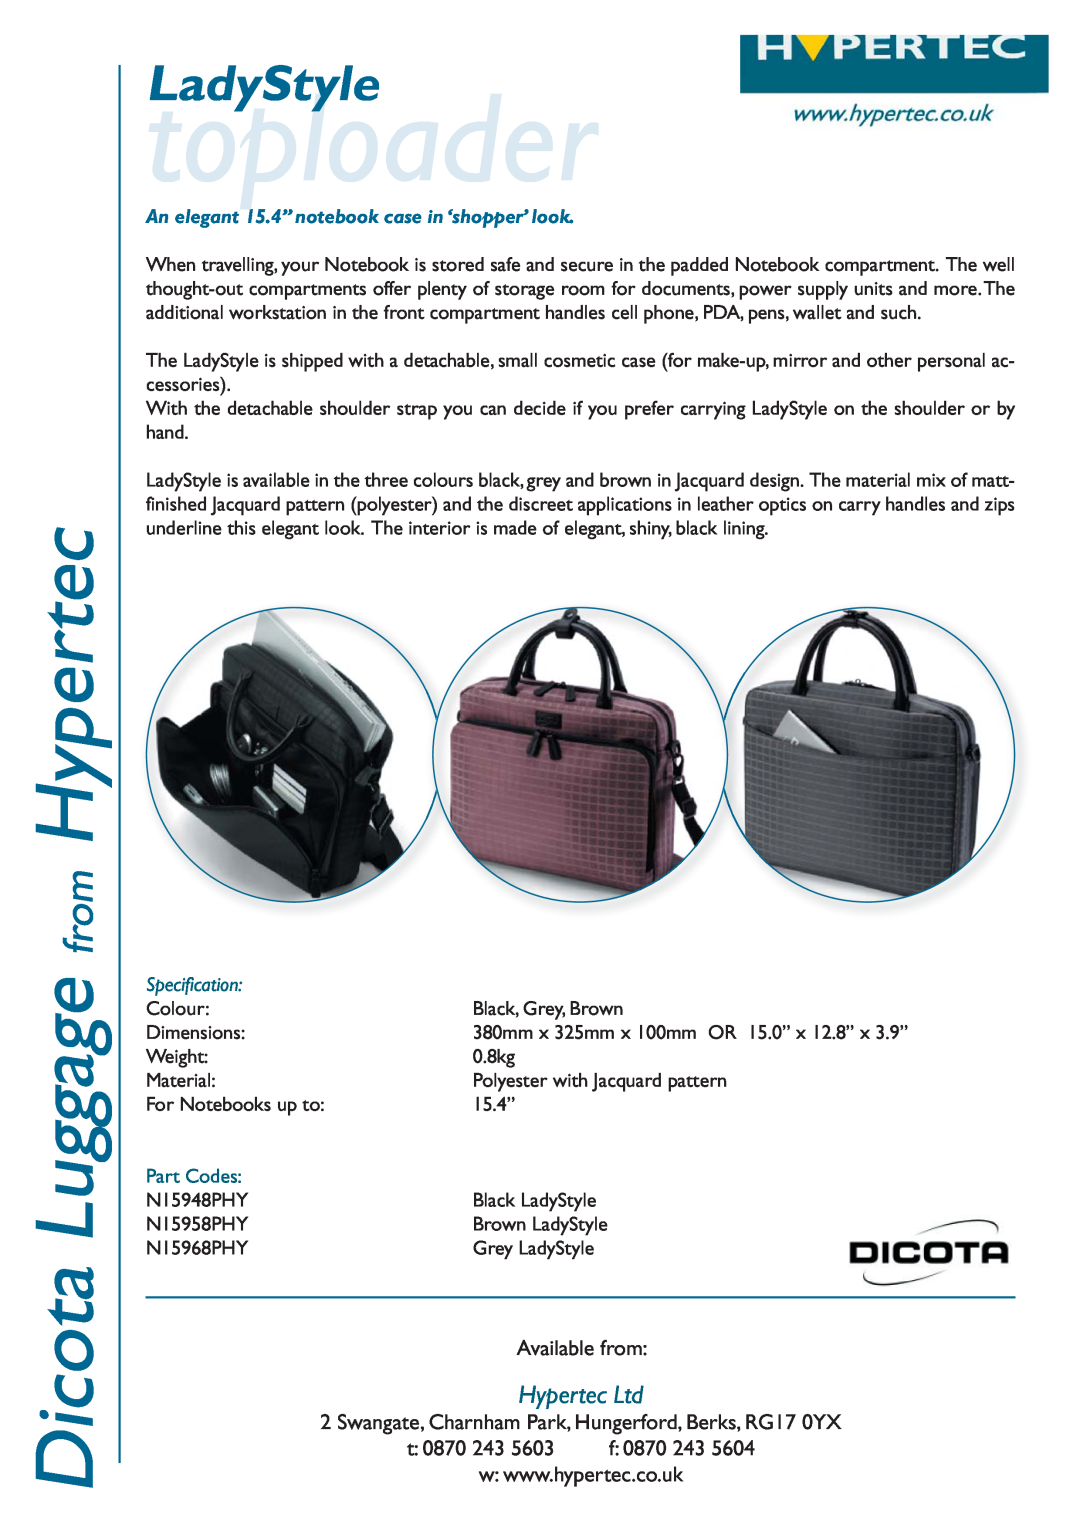 Hypertec N15968PHY dimensions toploader, Dicota Luggage from Hypertec, LadyStyle, Available from, t 0870 243, Part Codes 